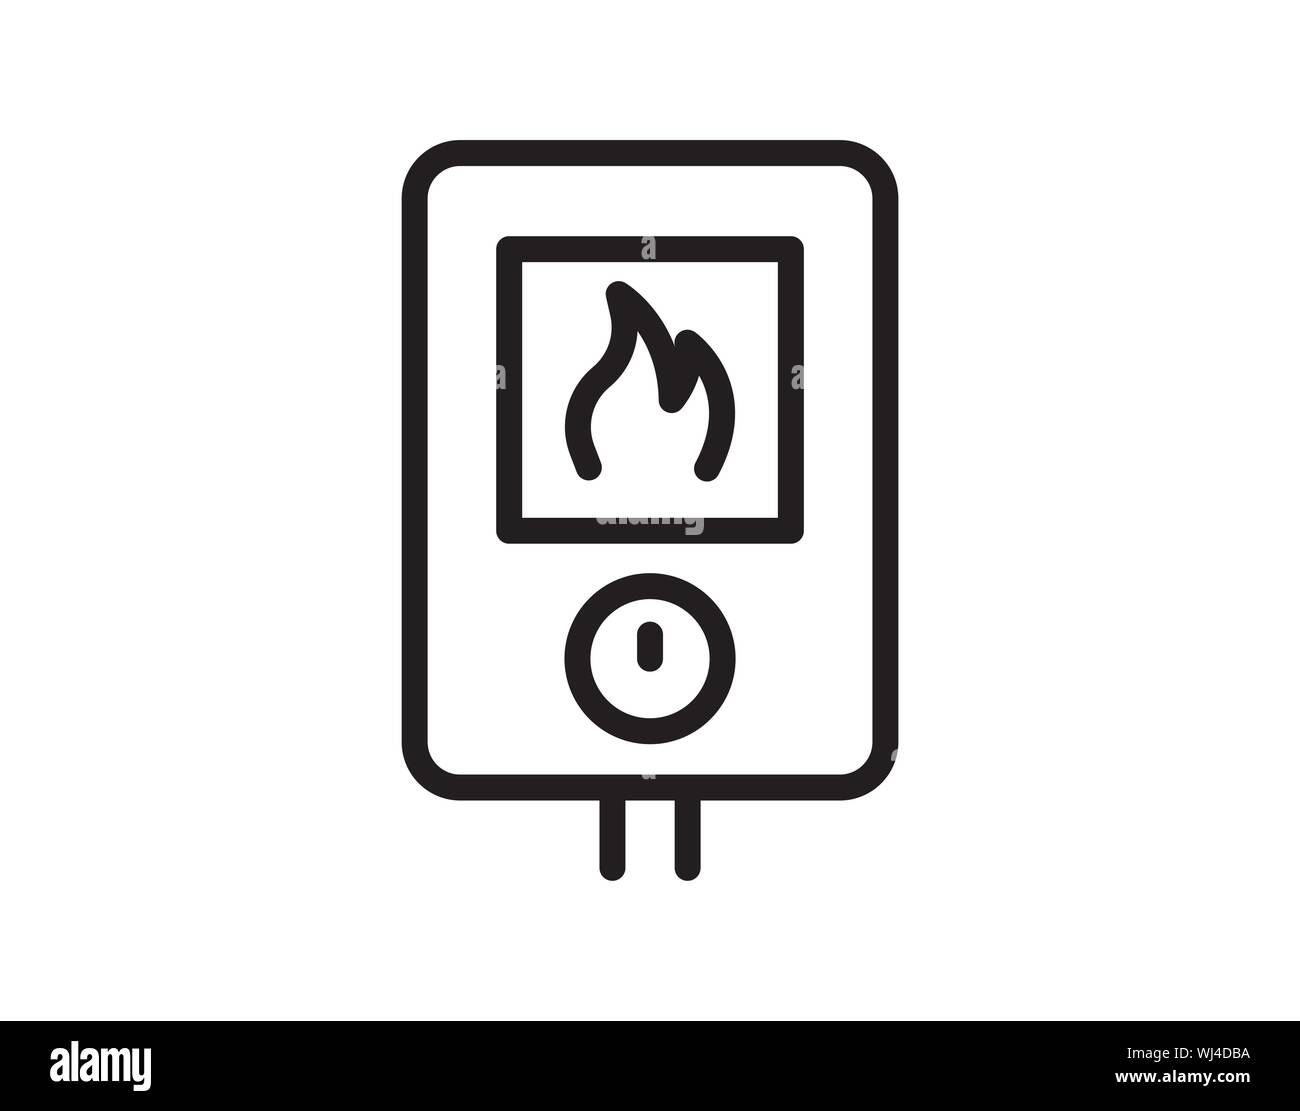 Gas heating black icon sign on isolated vector image Stock Vector